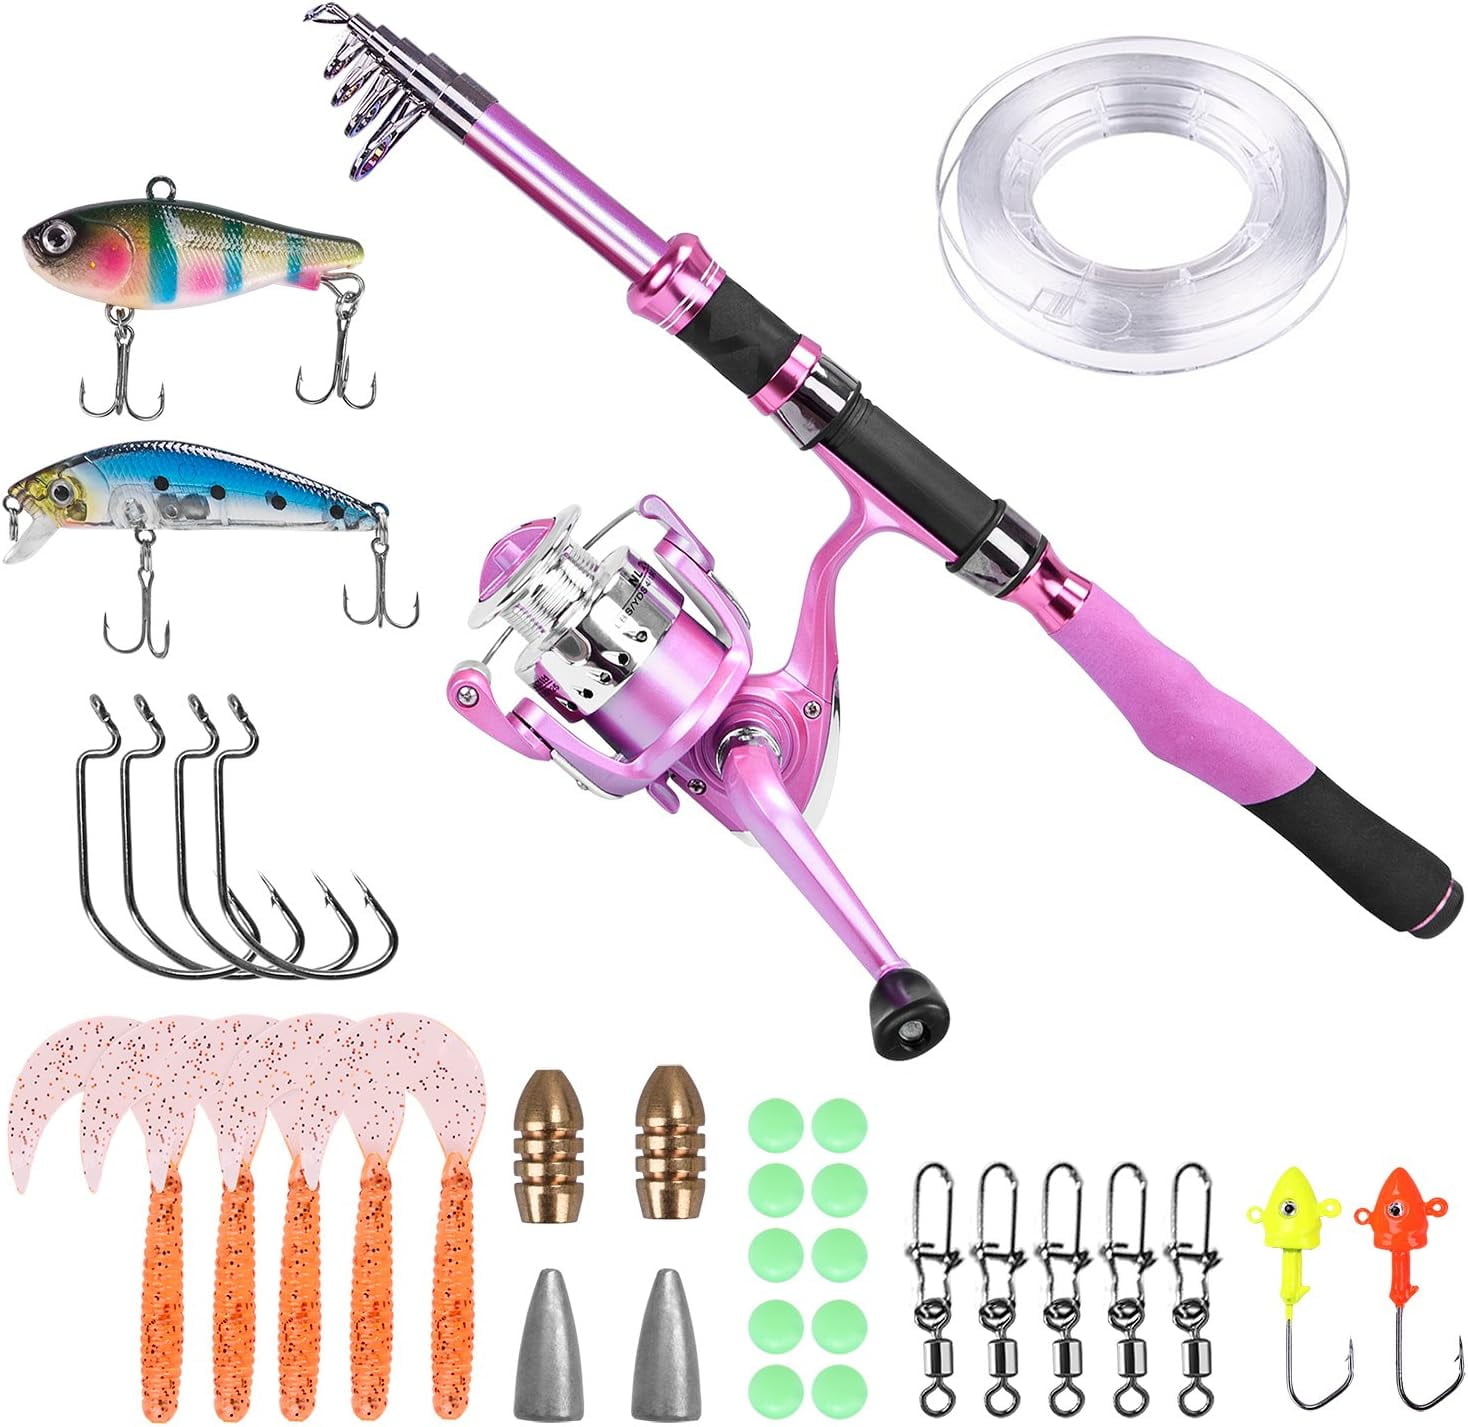 Rod Reel Combo PLUSINNO Fishing And Telescopic Pole With EVA Handle X Case  230608 From Heng06, $63.31